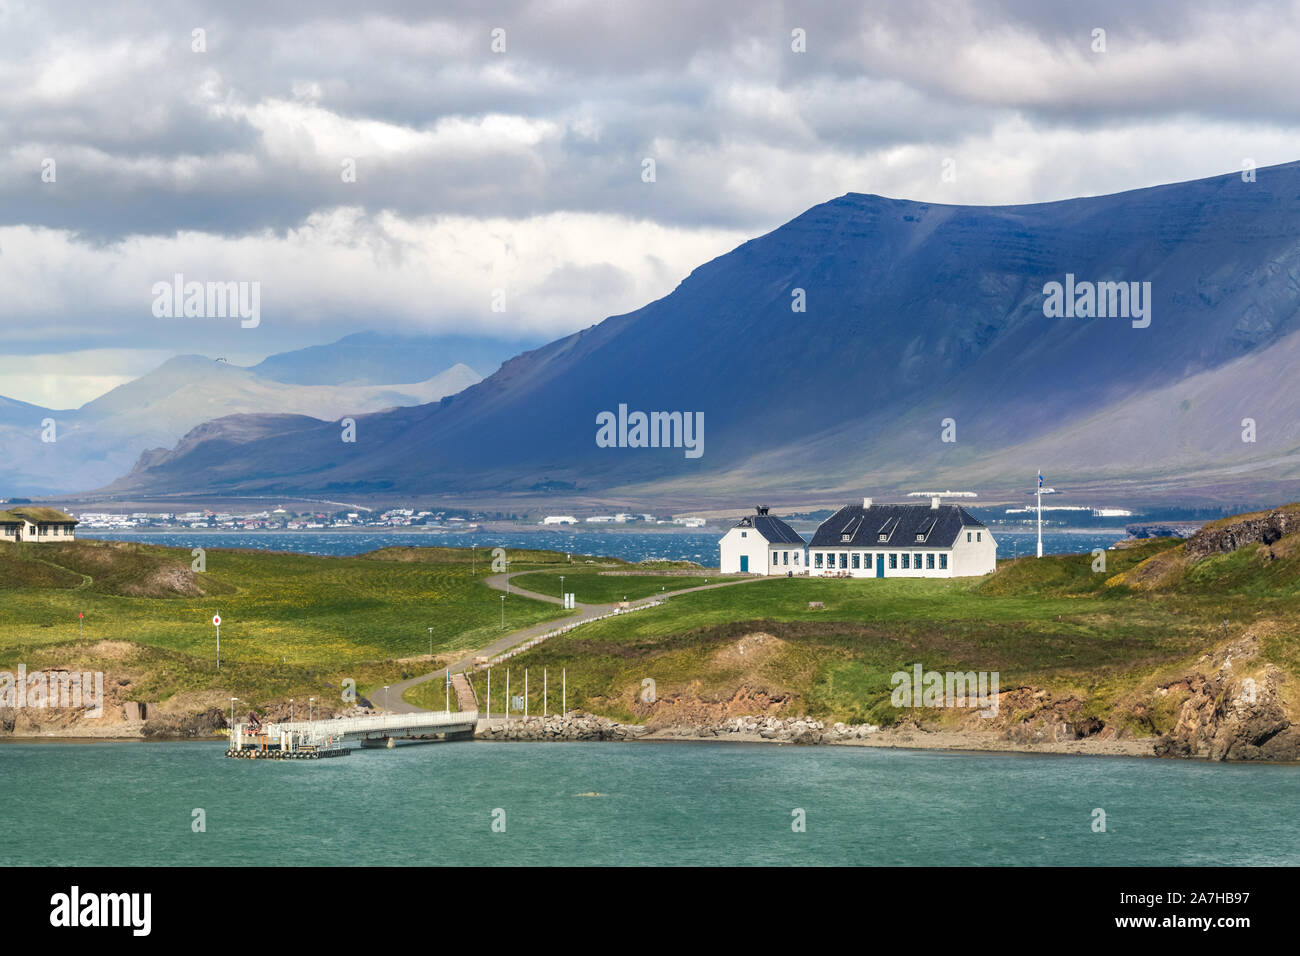 The Videy Island and an old white guest house viewed from the coastline of Reykjavik, Iceland. Stock Photo